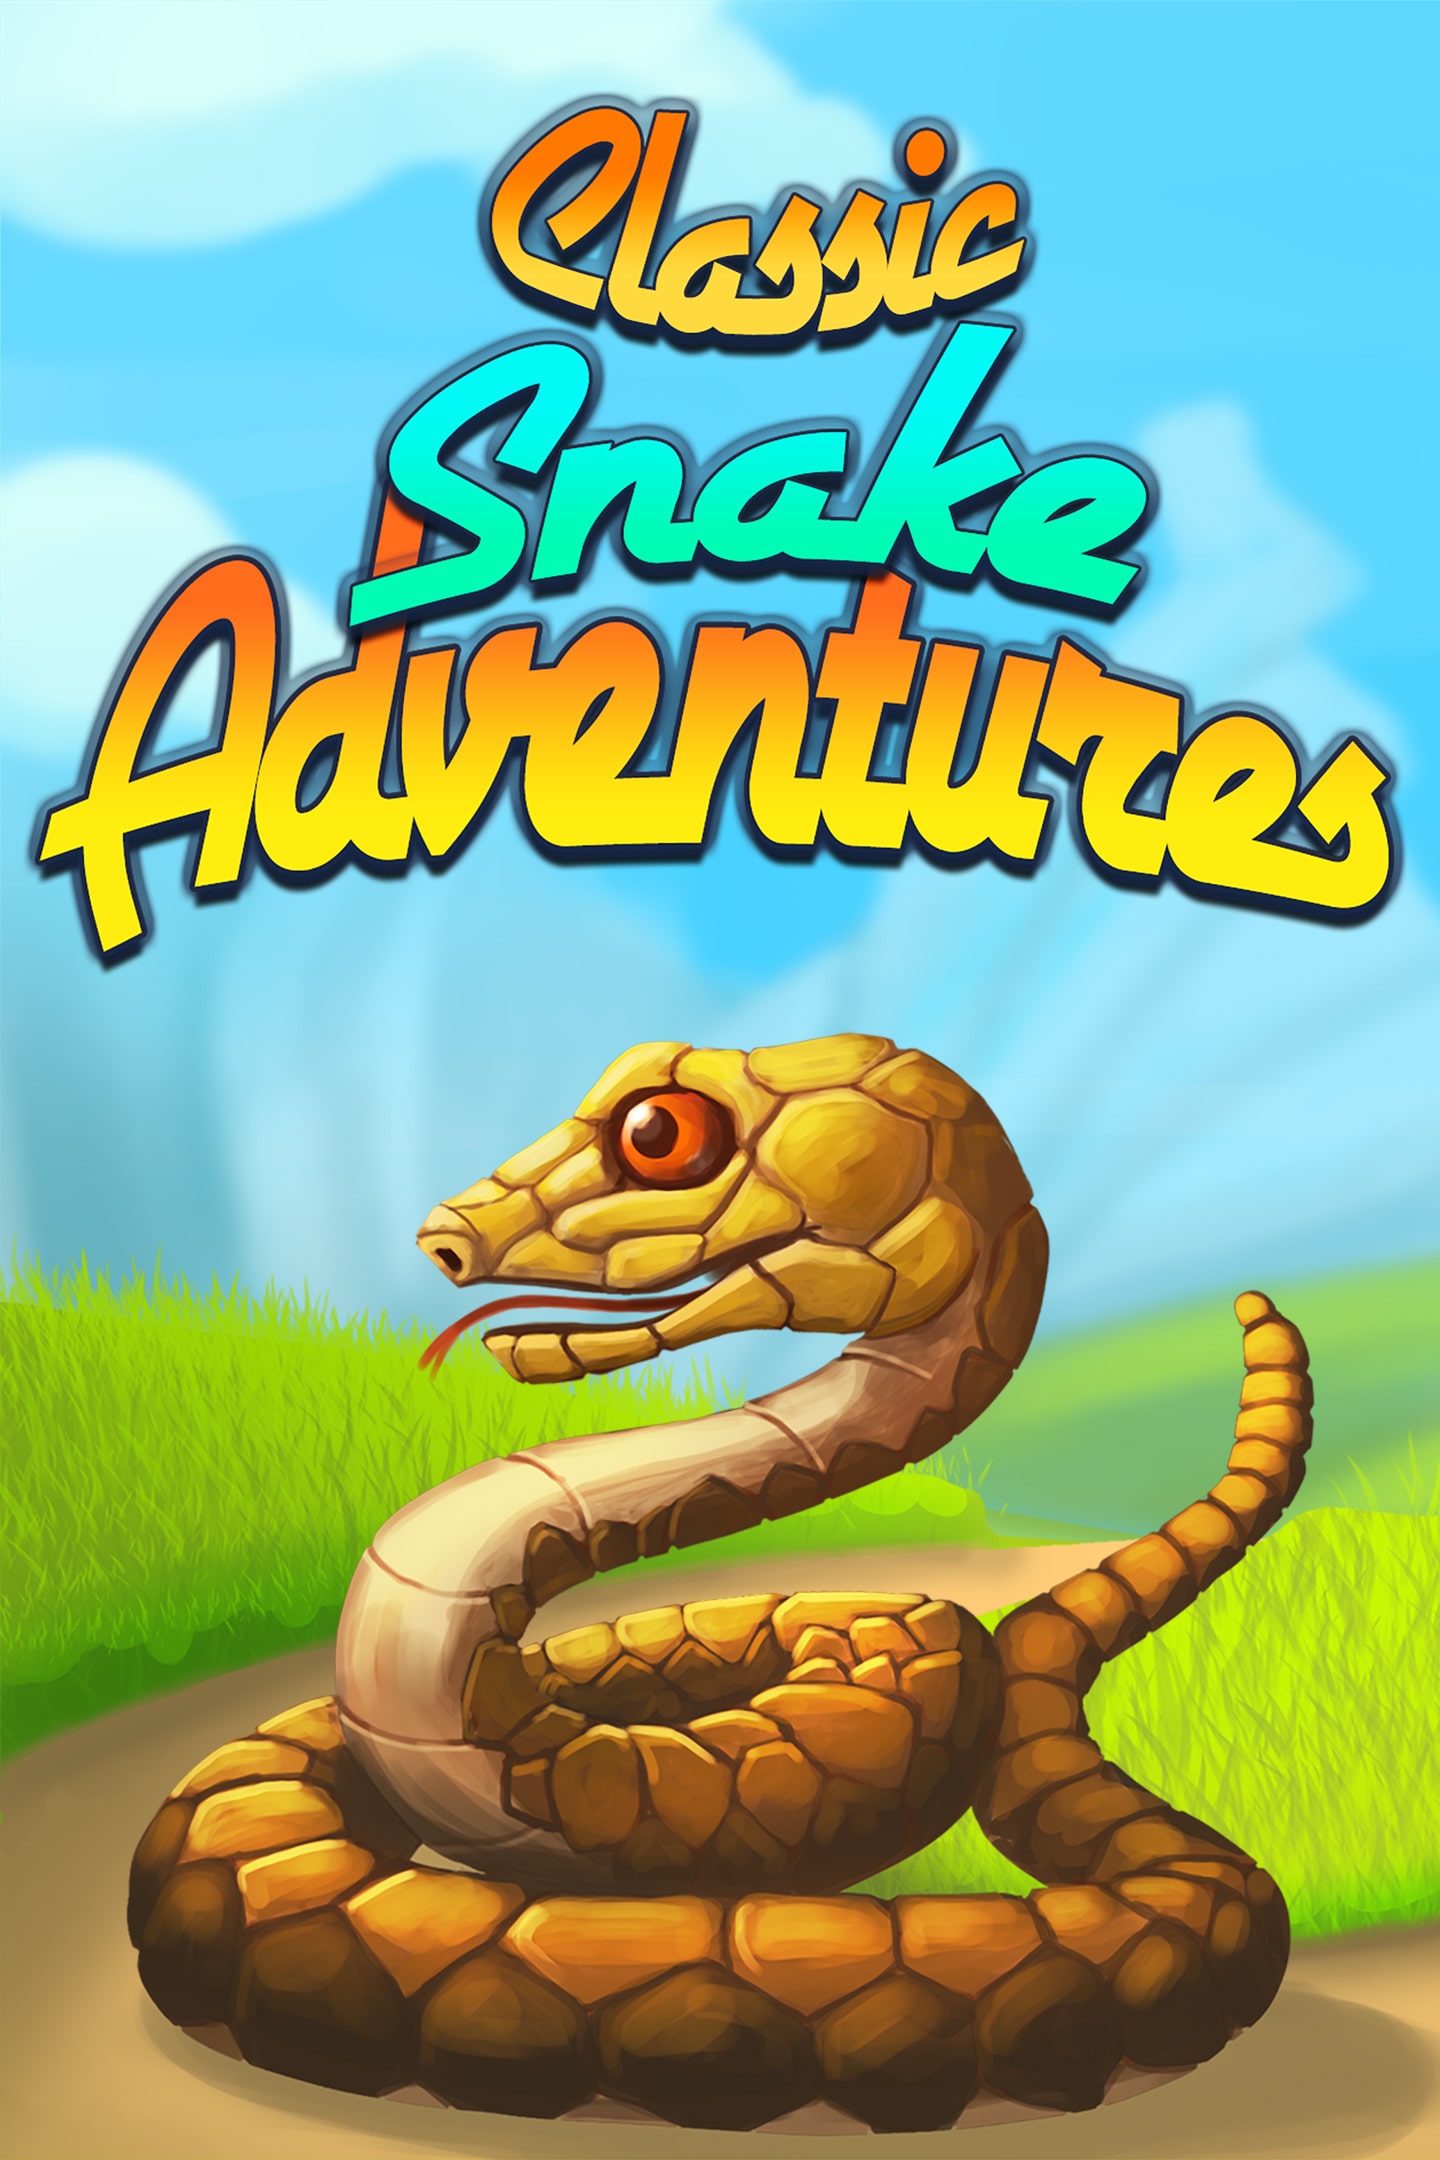 Snake game, the classic one - Release Announcements 